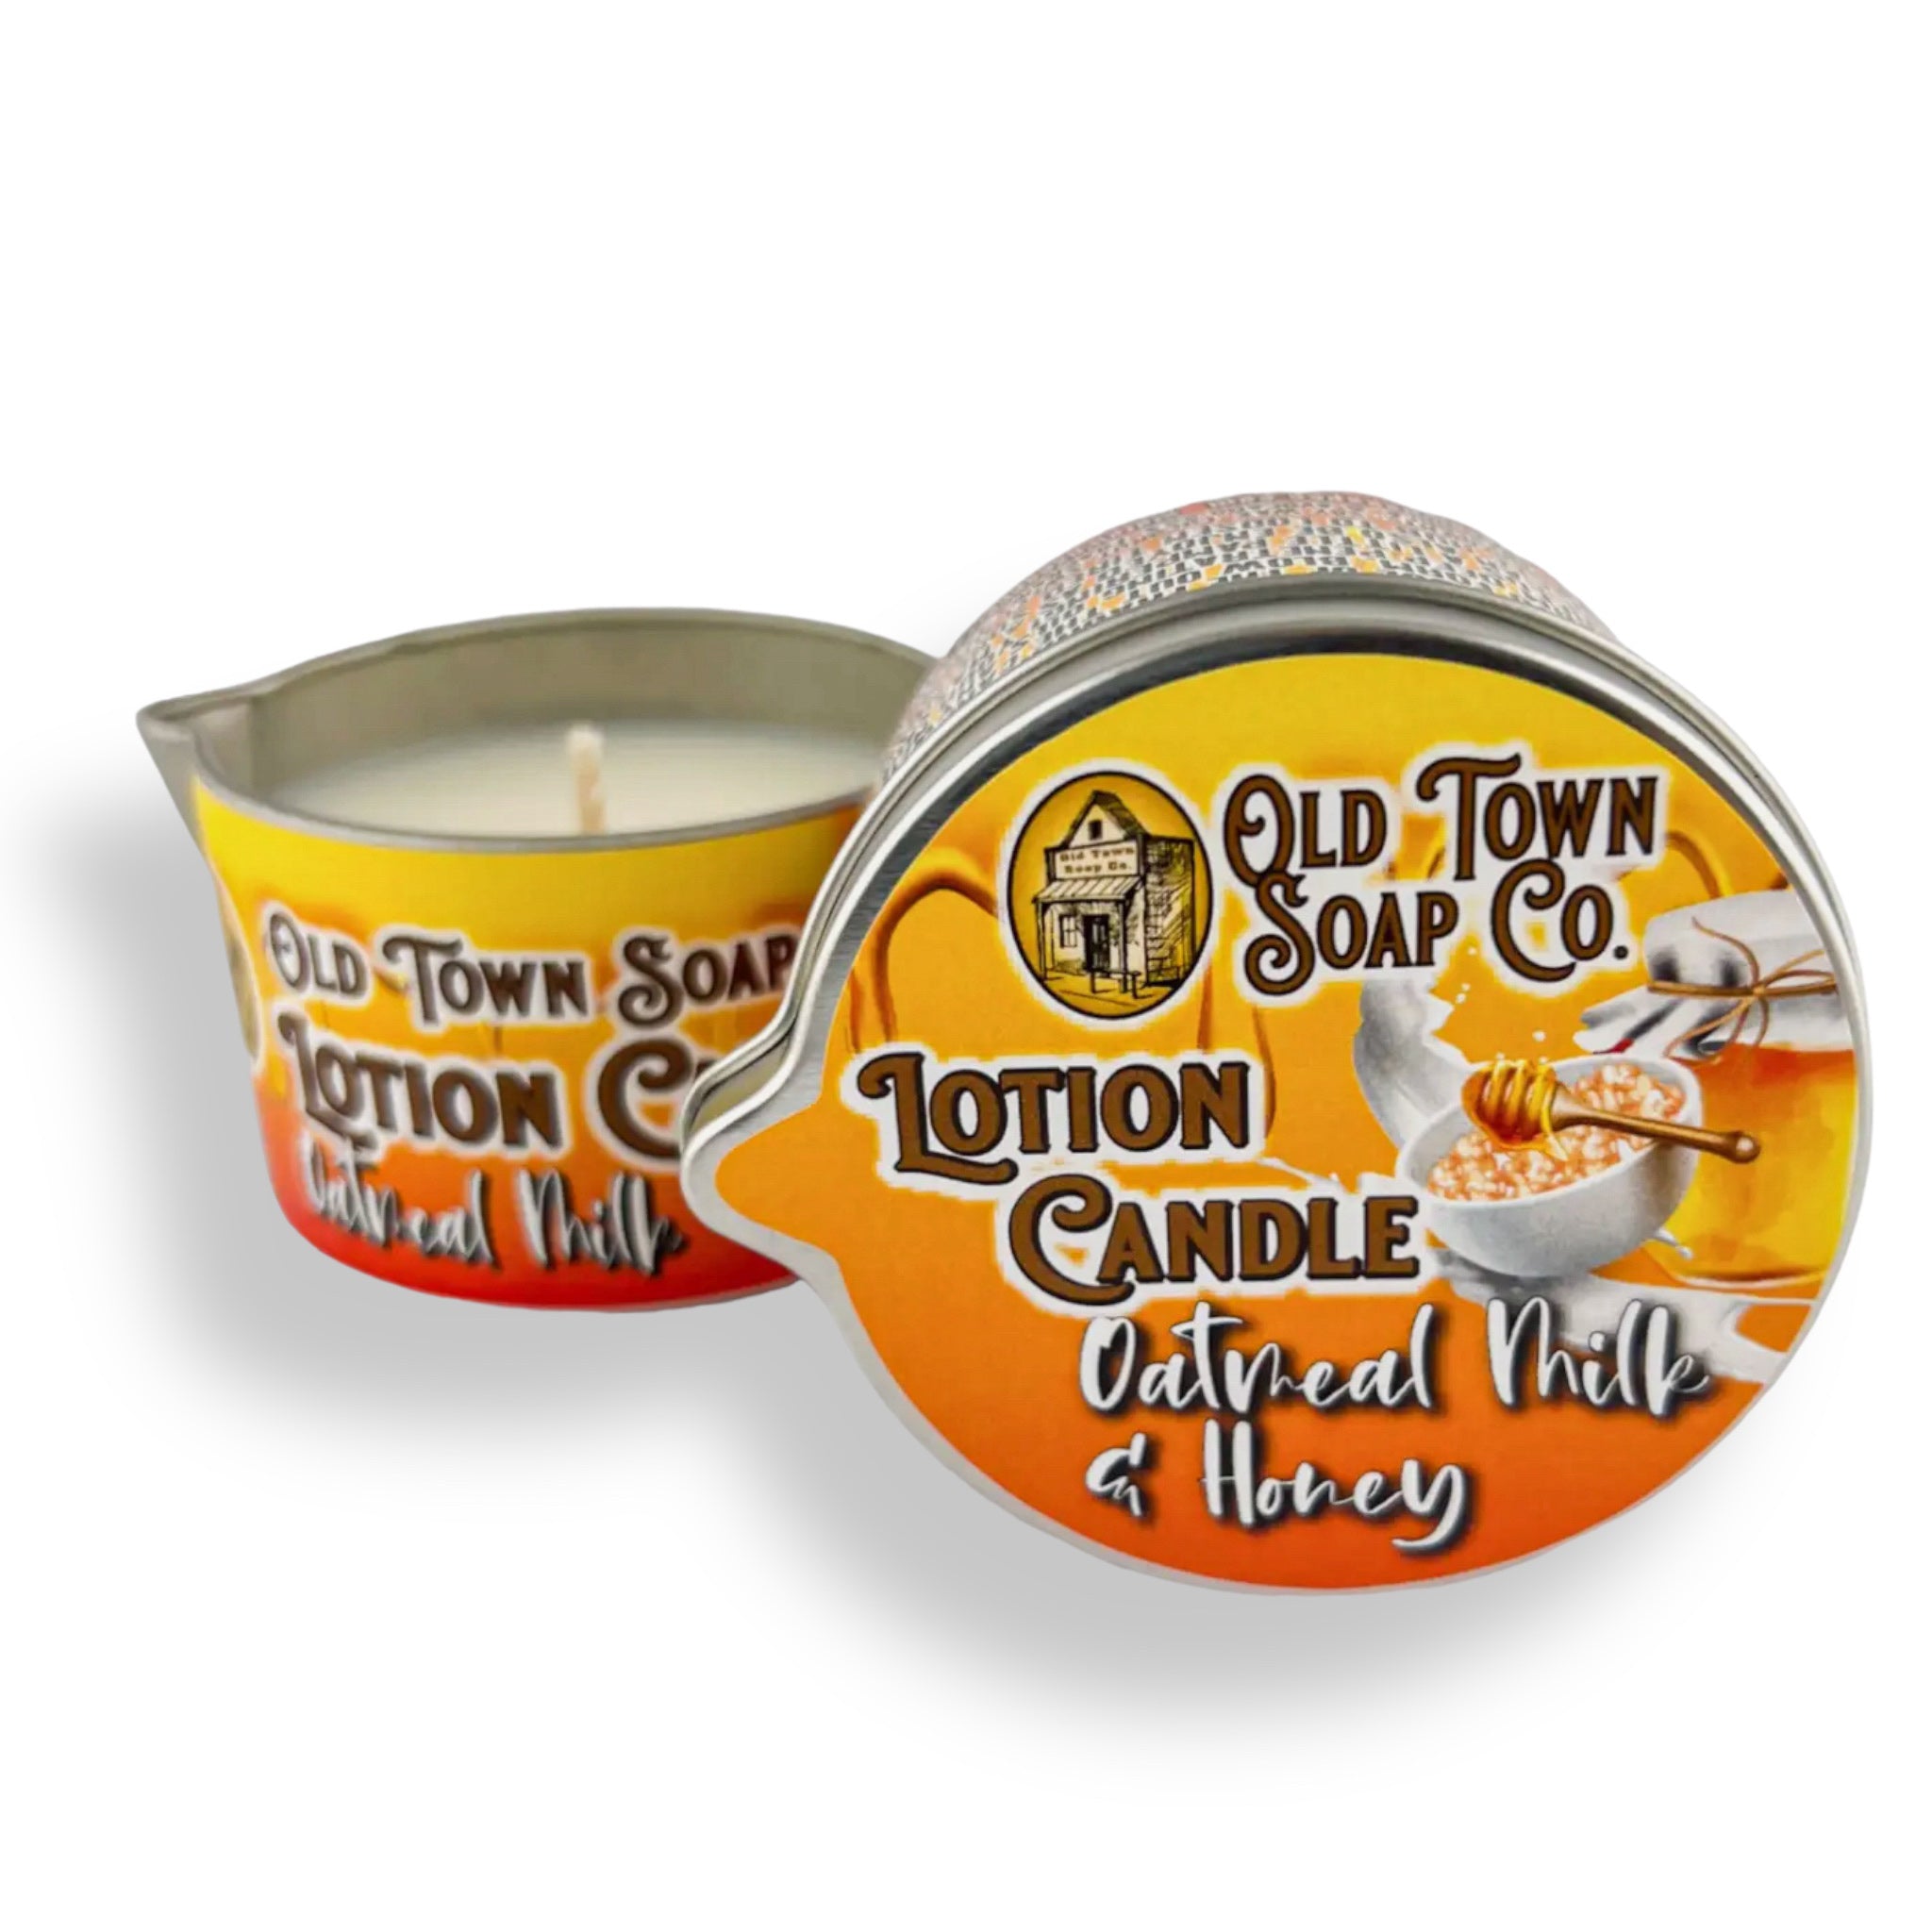 LOTION CANDLE - Oatmeal, Milk & Honey - Old Town Soap Co